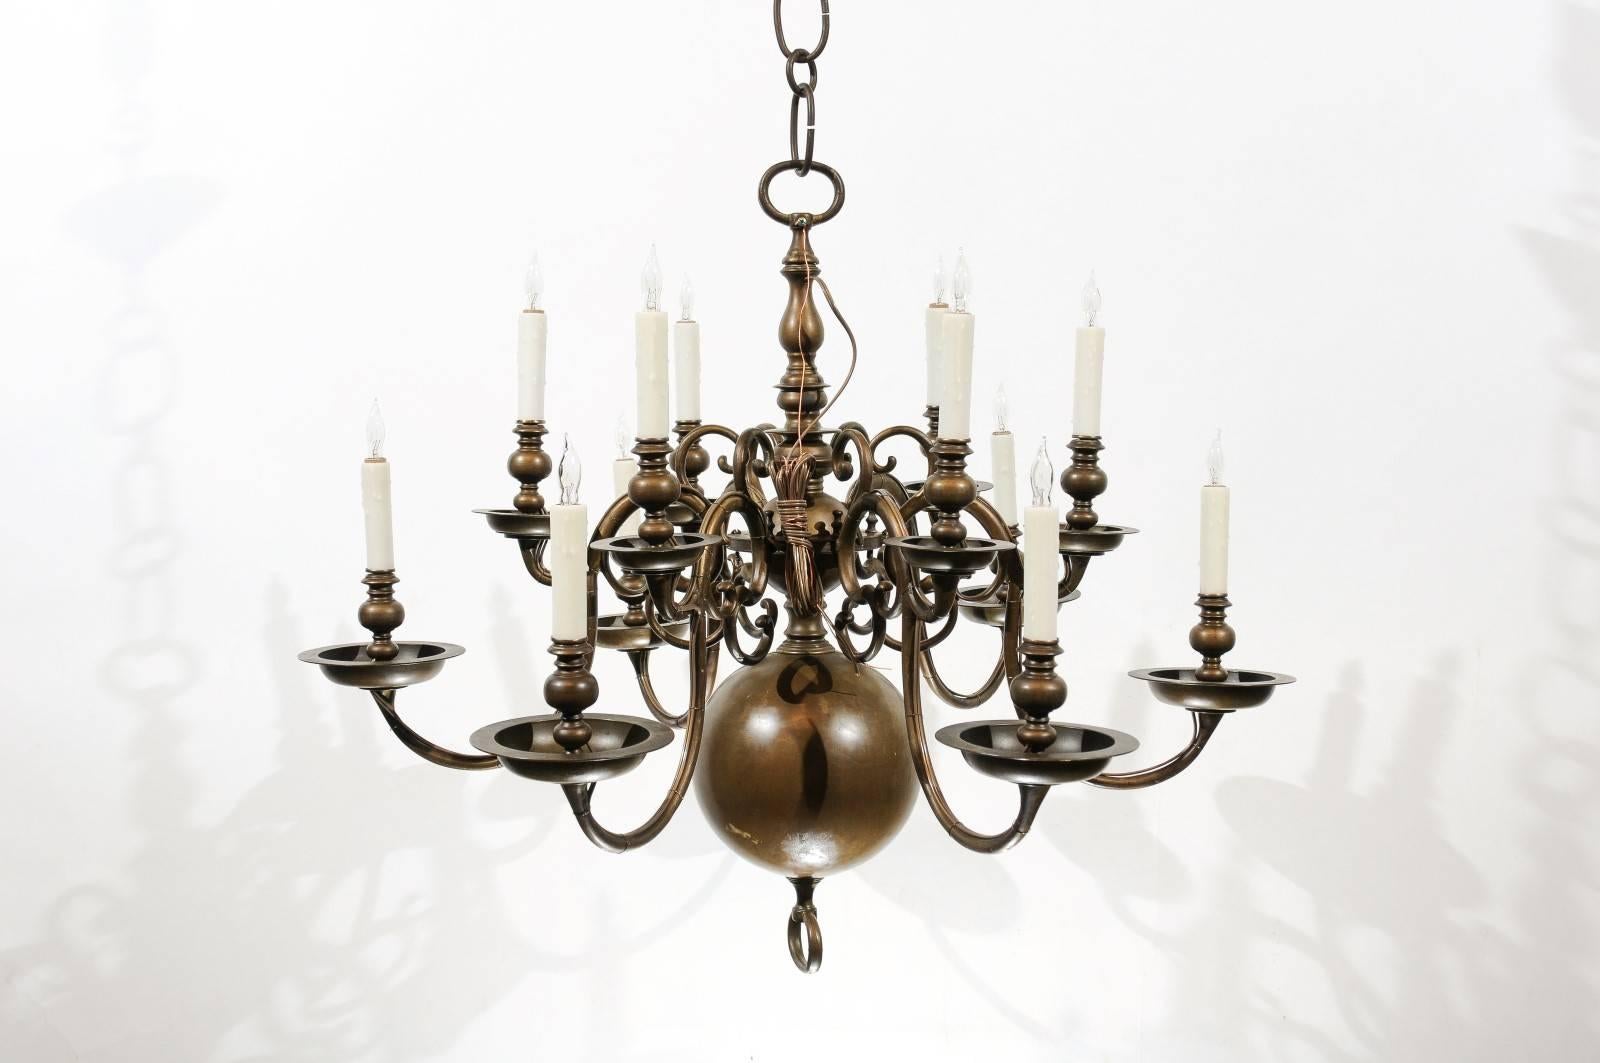 Dutch 18th century brass chandelier with 12 lights. Recently wired for U.S.A 

William Word Fine Antiques: Atlanta's source for antique interiors since 1956.